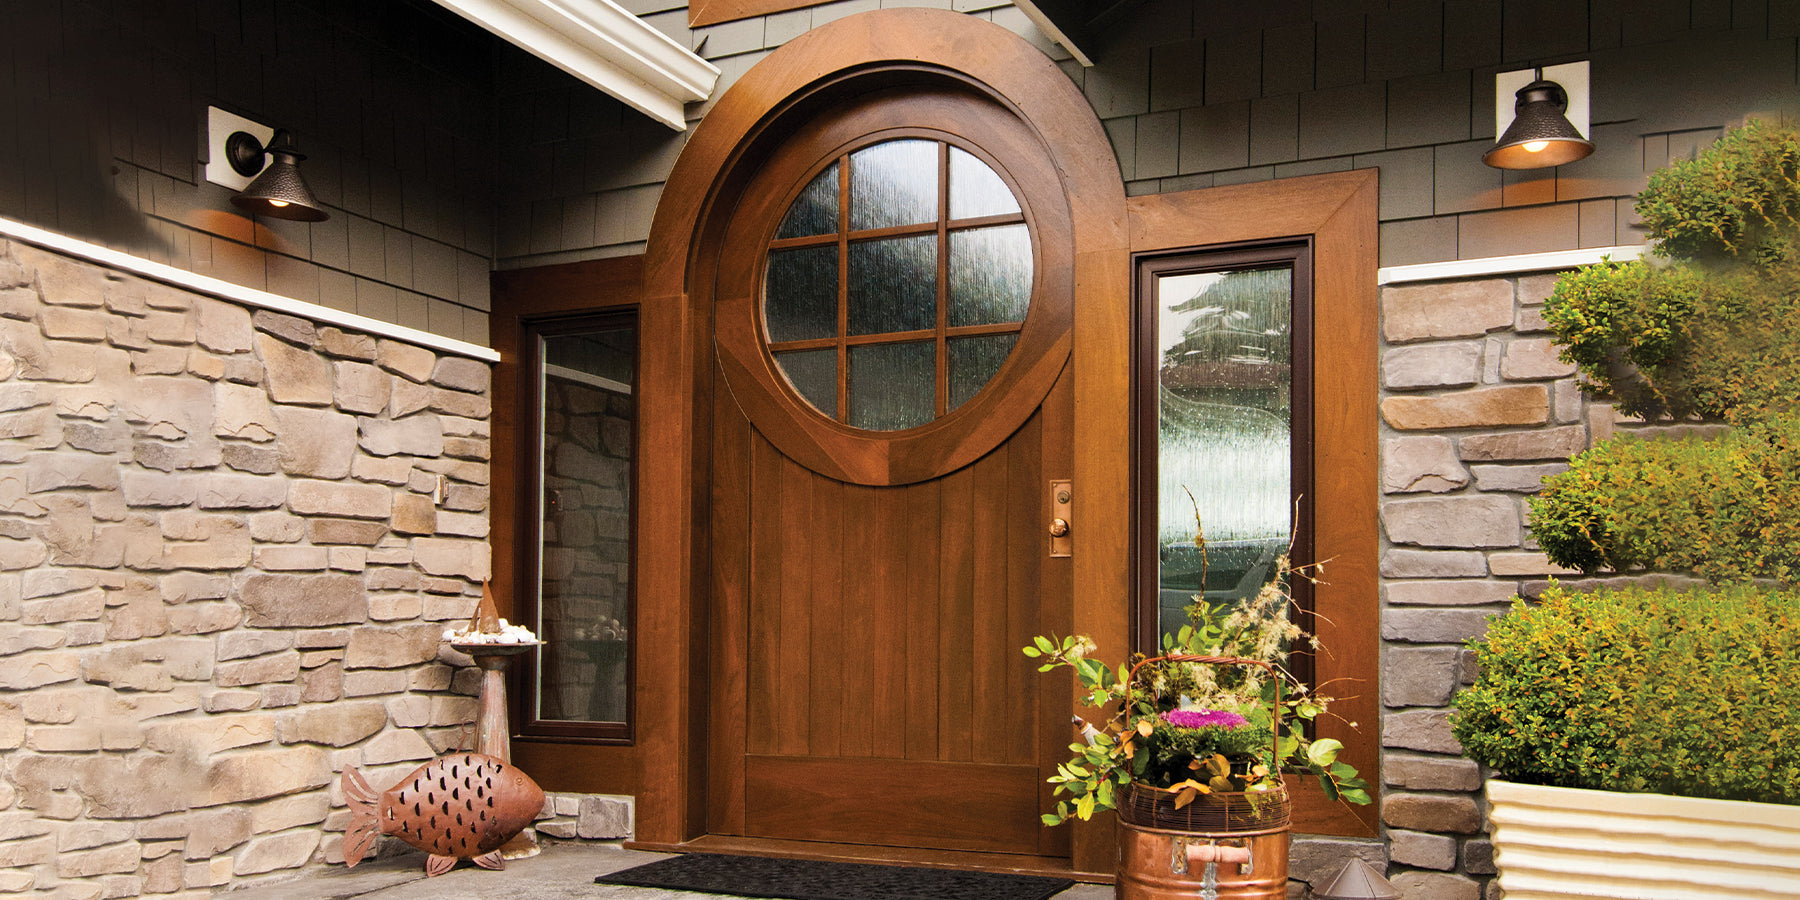 House entryway featuring a luxurious solid wood custom door design with la large circular window on the top area.